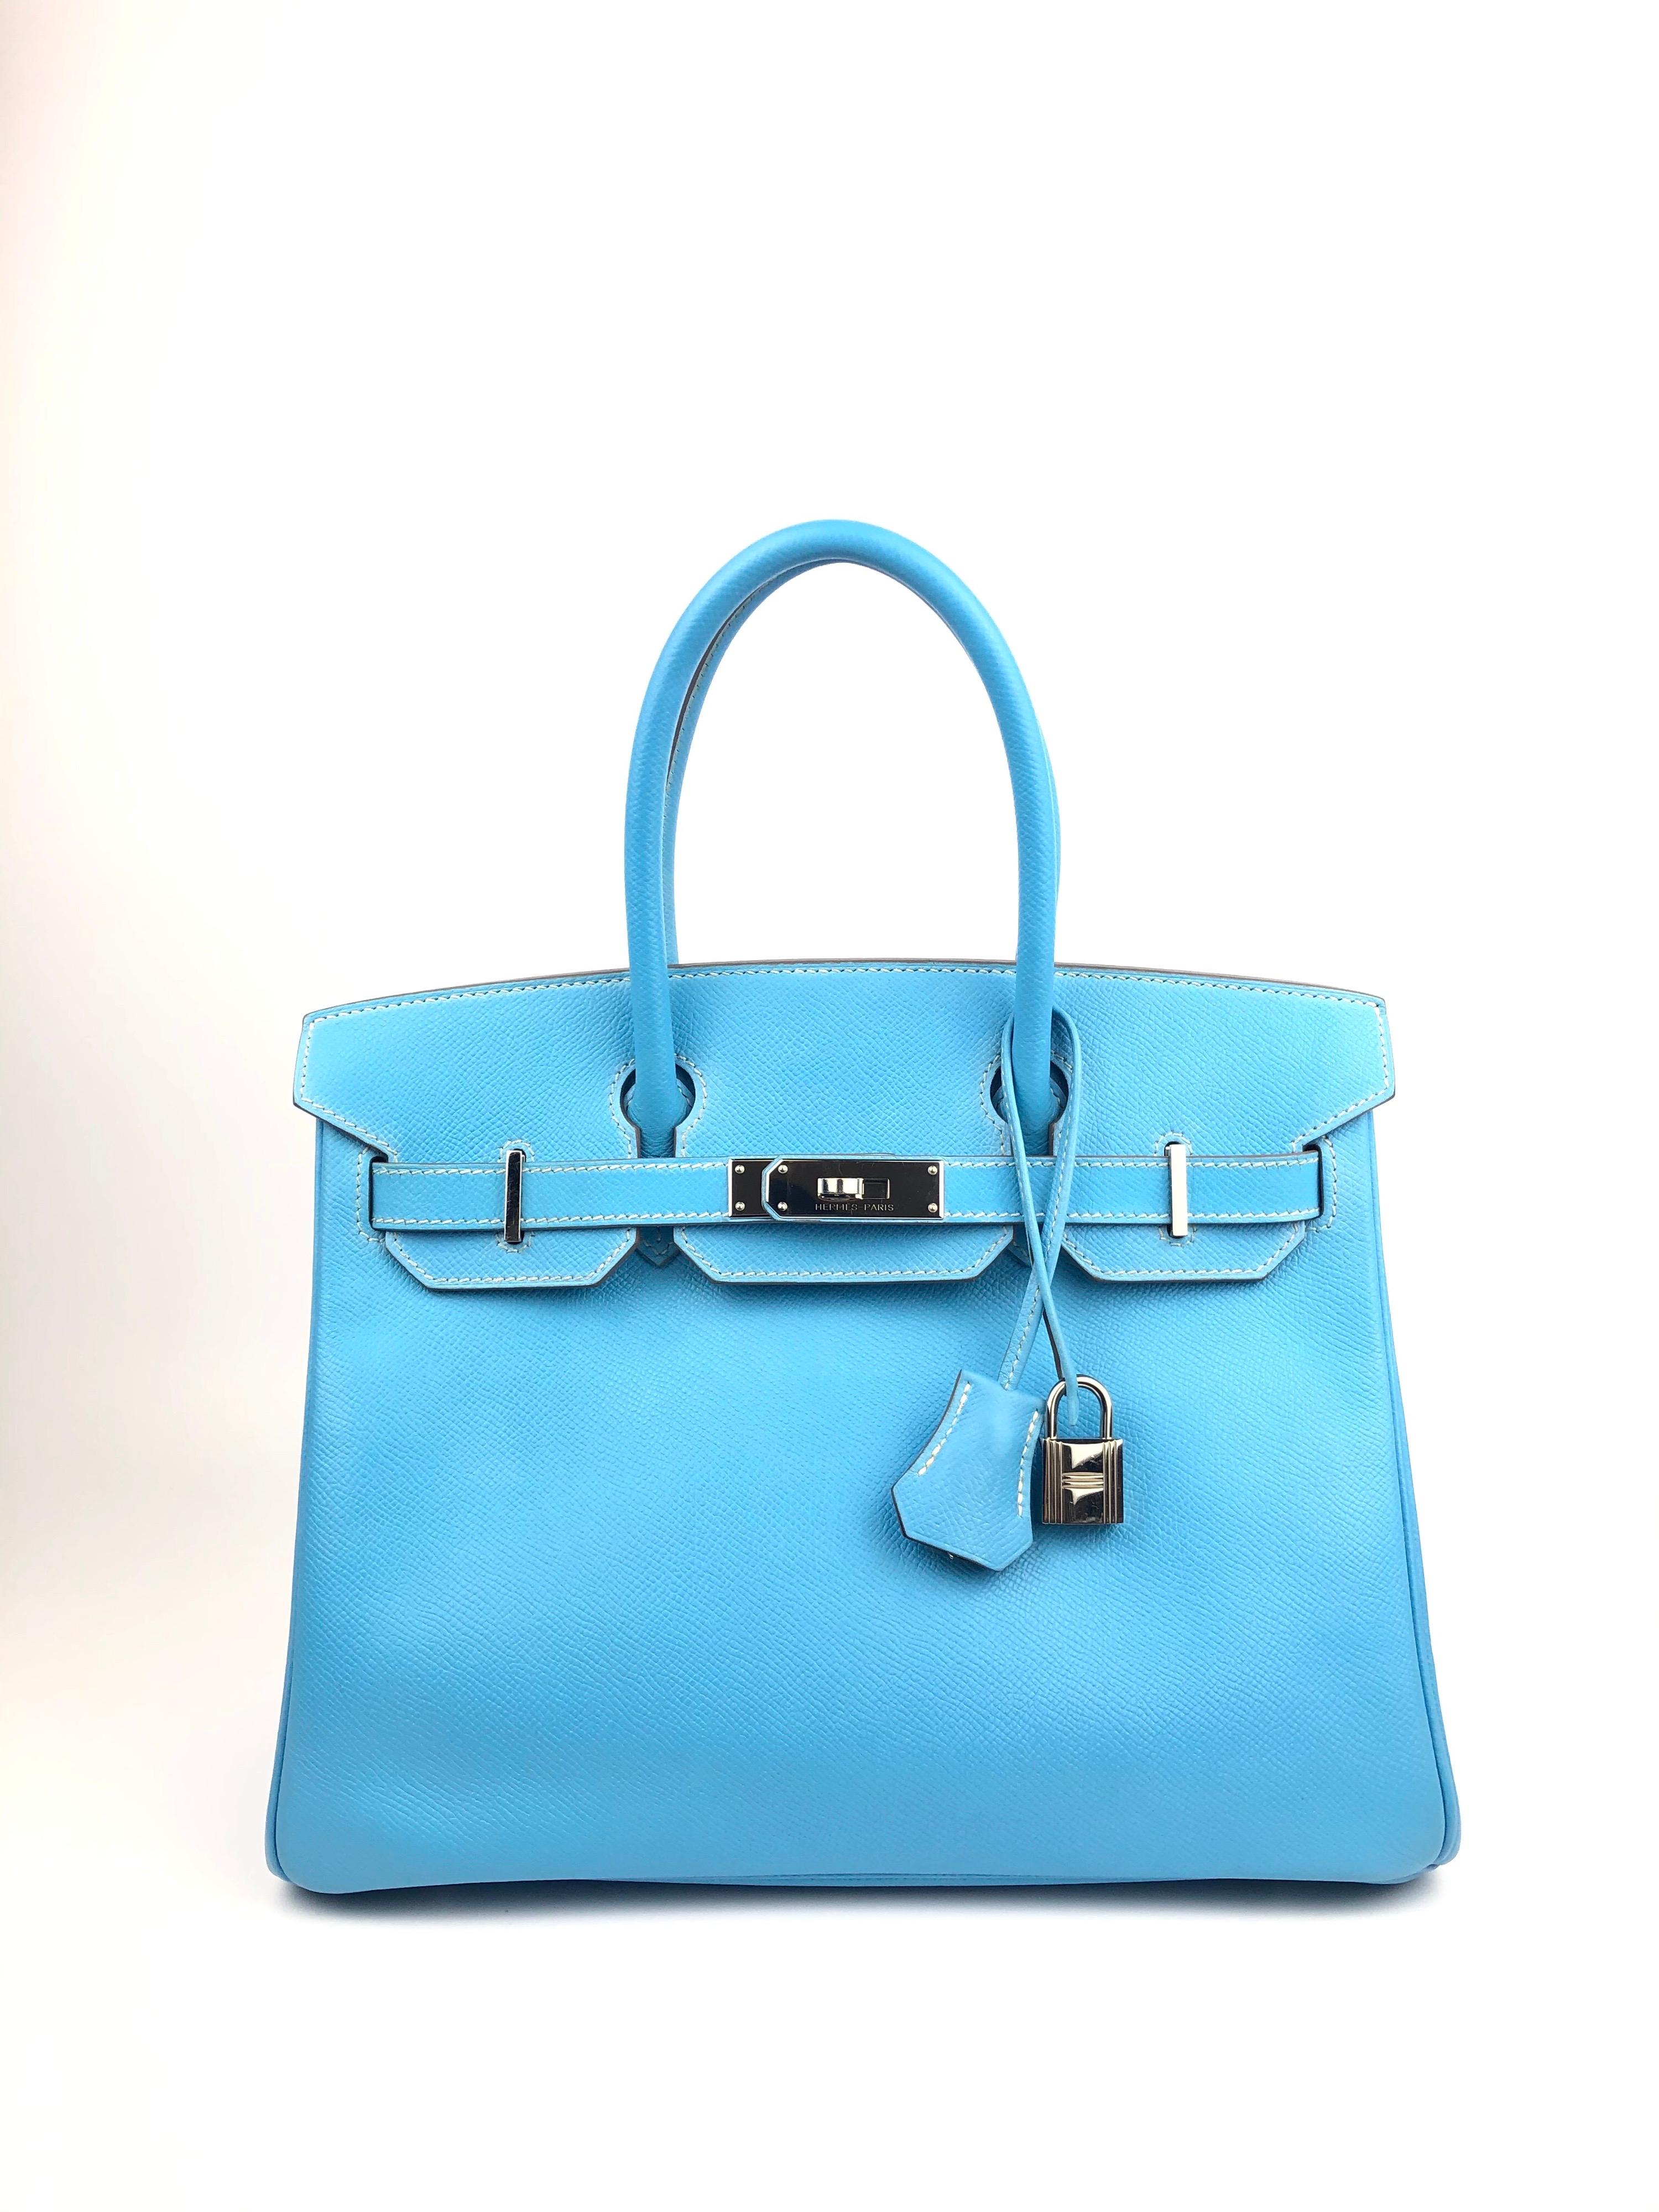 Hermes Birkin 30 Blue Celeste Mykonos Candy Collection Palladium Hardware. Excellent Condition, light hairlines on hardware, perfect corners and structure.

Shop with Confidence from Lux Addicts. Authenticity Guaranteed! 